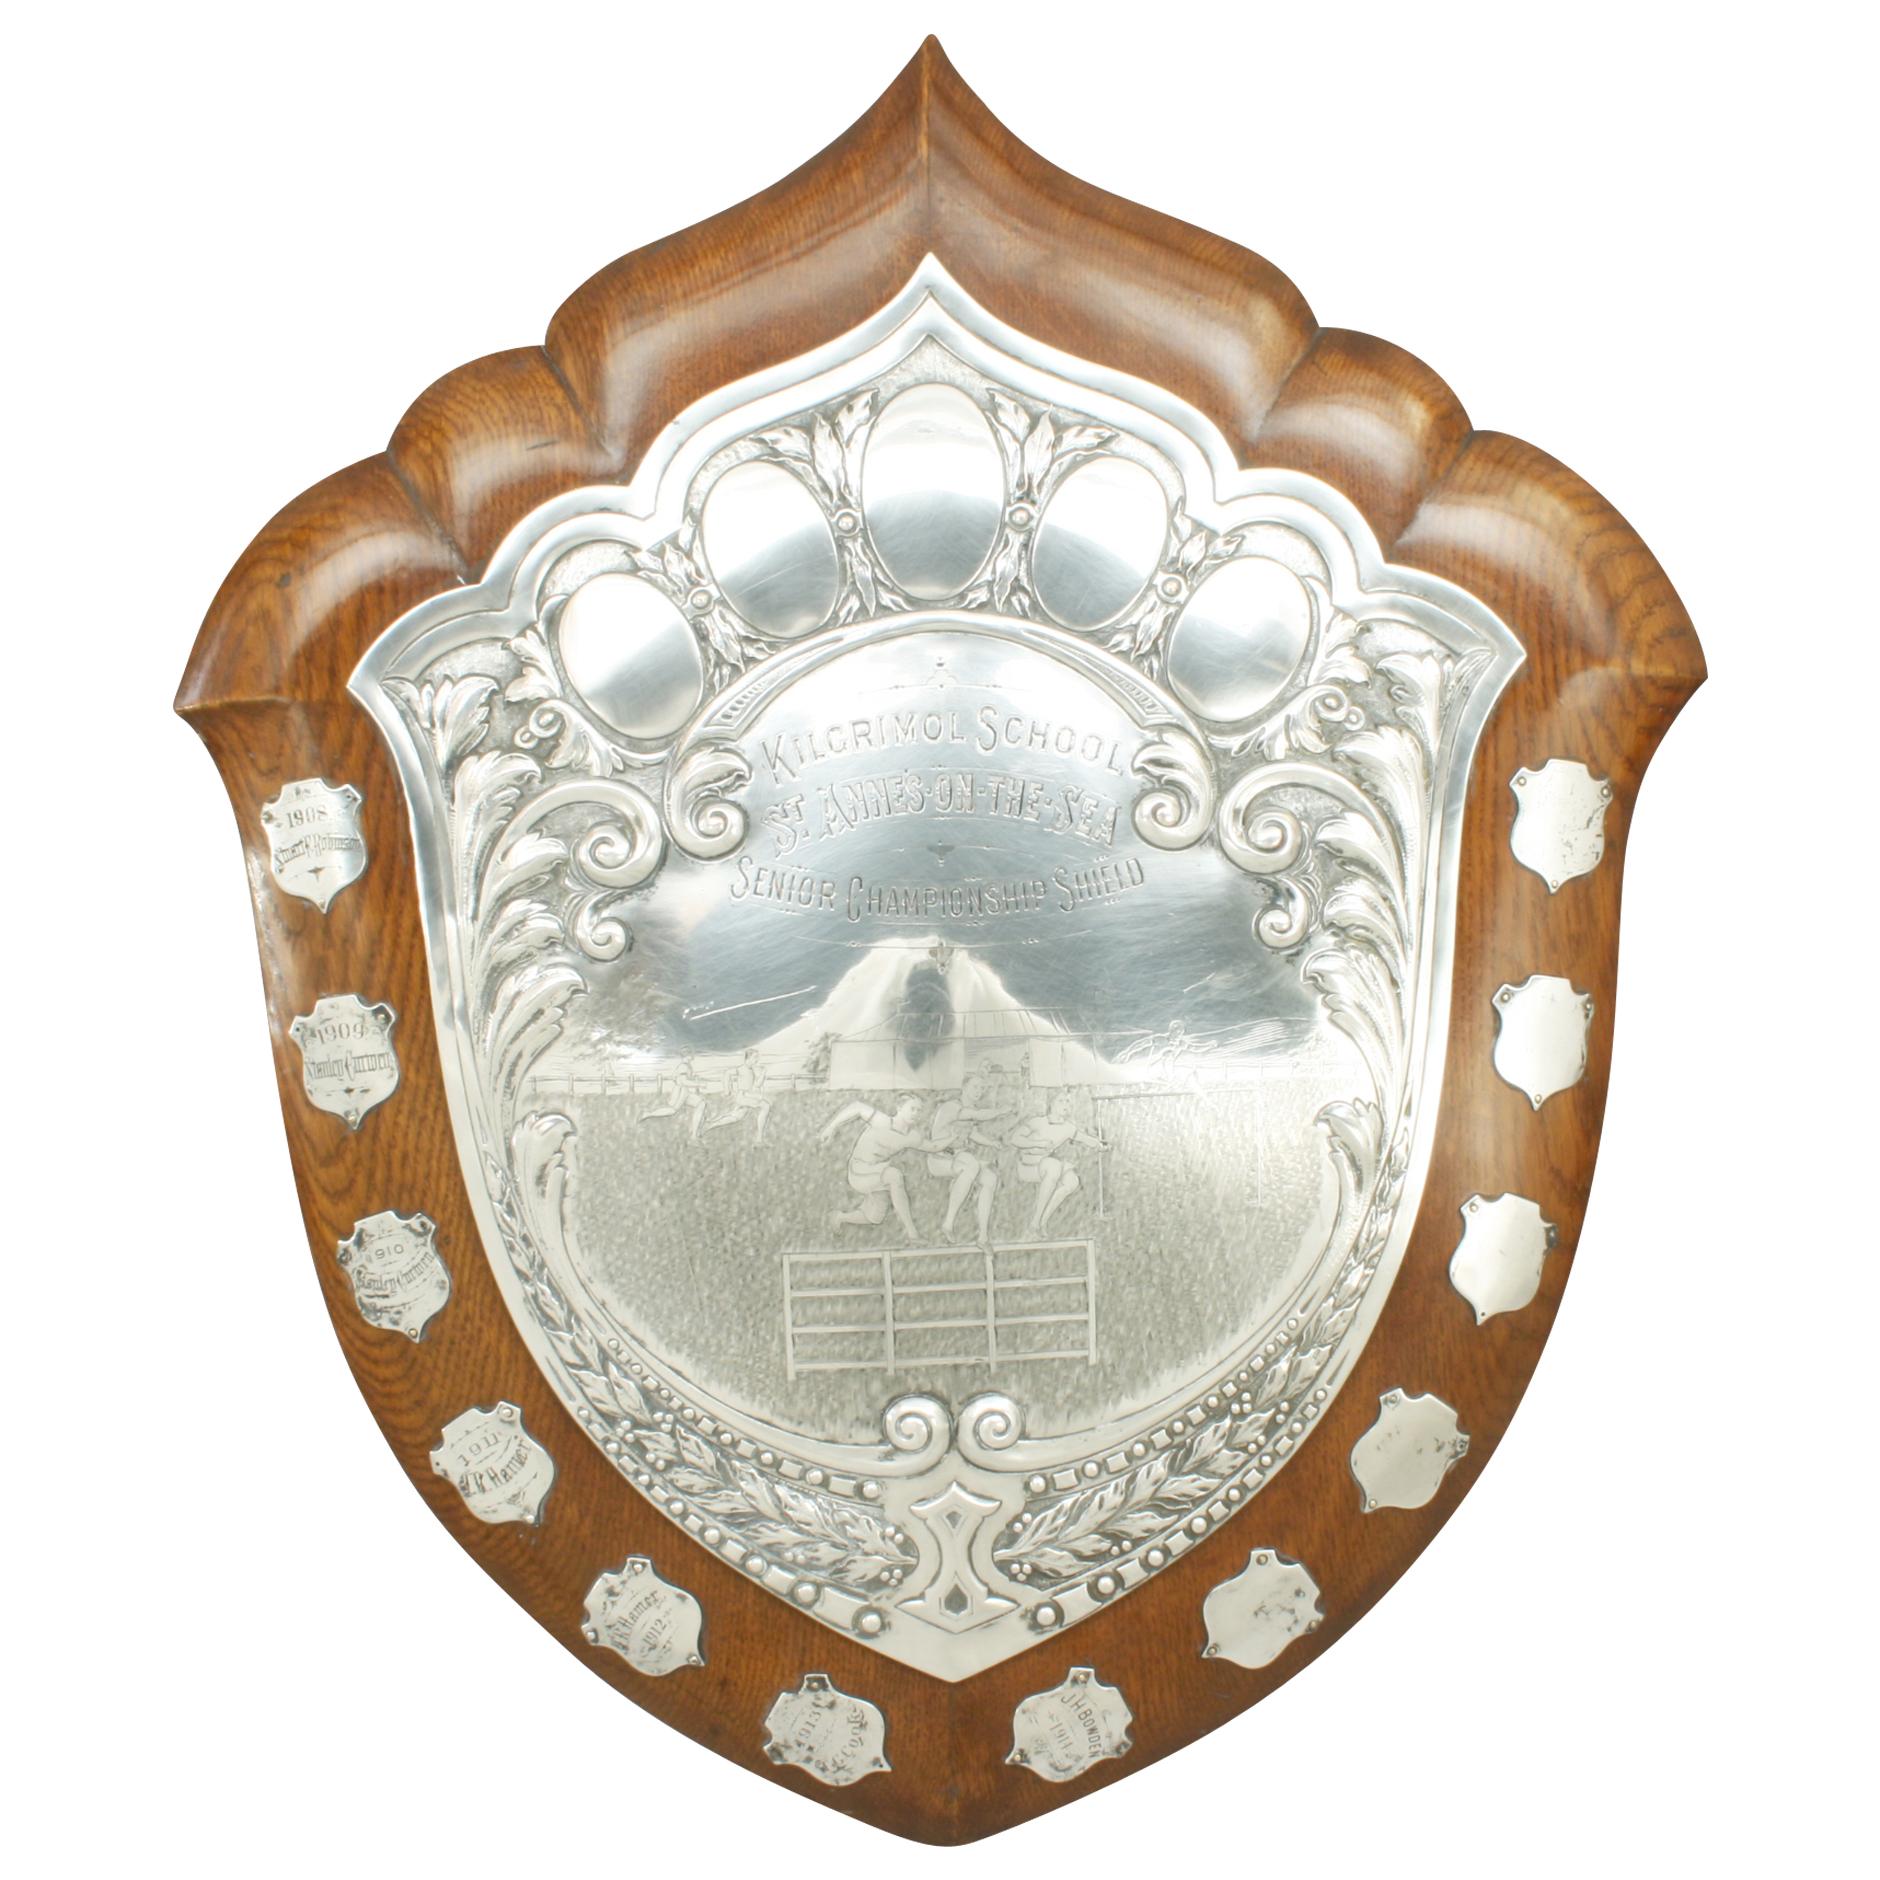 Presentation Shield Trophy, Walker and Hall.
A large freestanding, oak Athletics Shield Trophy with Sheffield plate decoration. The 'Senior Championship Shield' was presented by Kilgrimol School, St. Annes-on-the-Sea and was manufactured by the